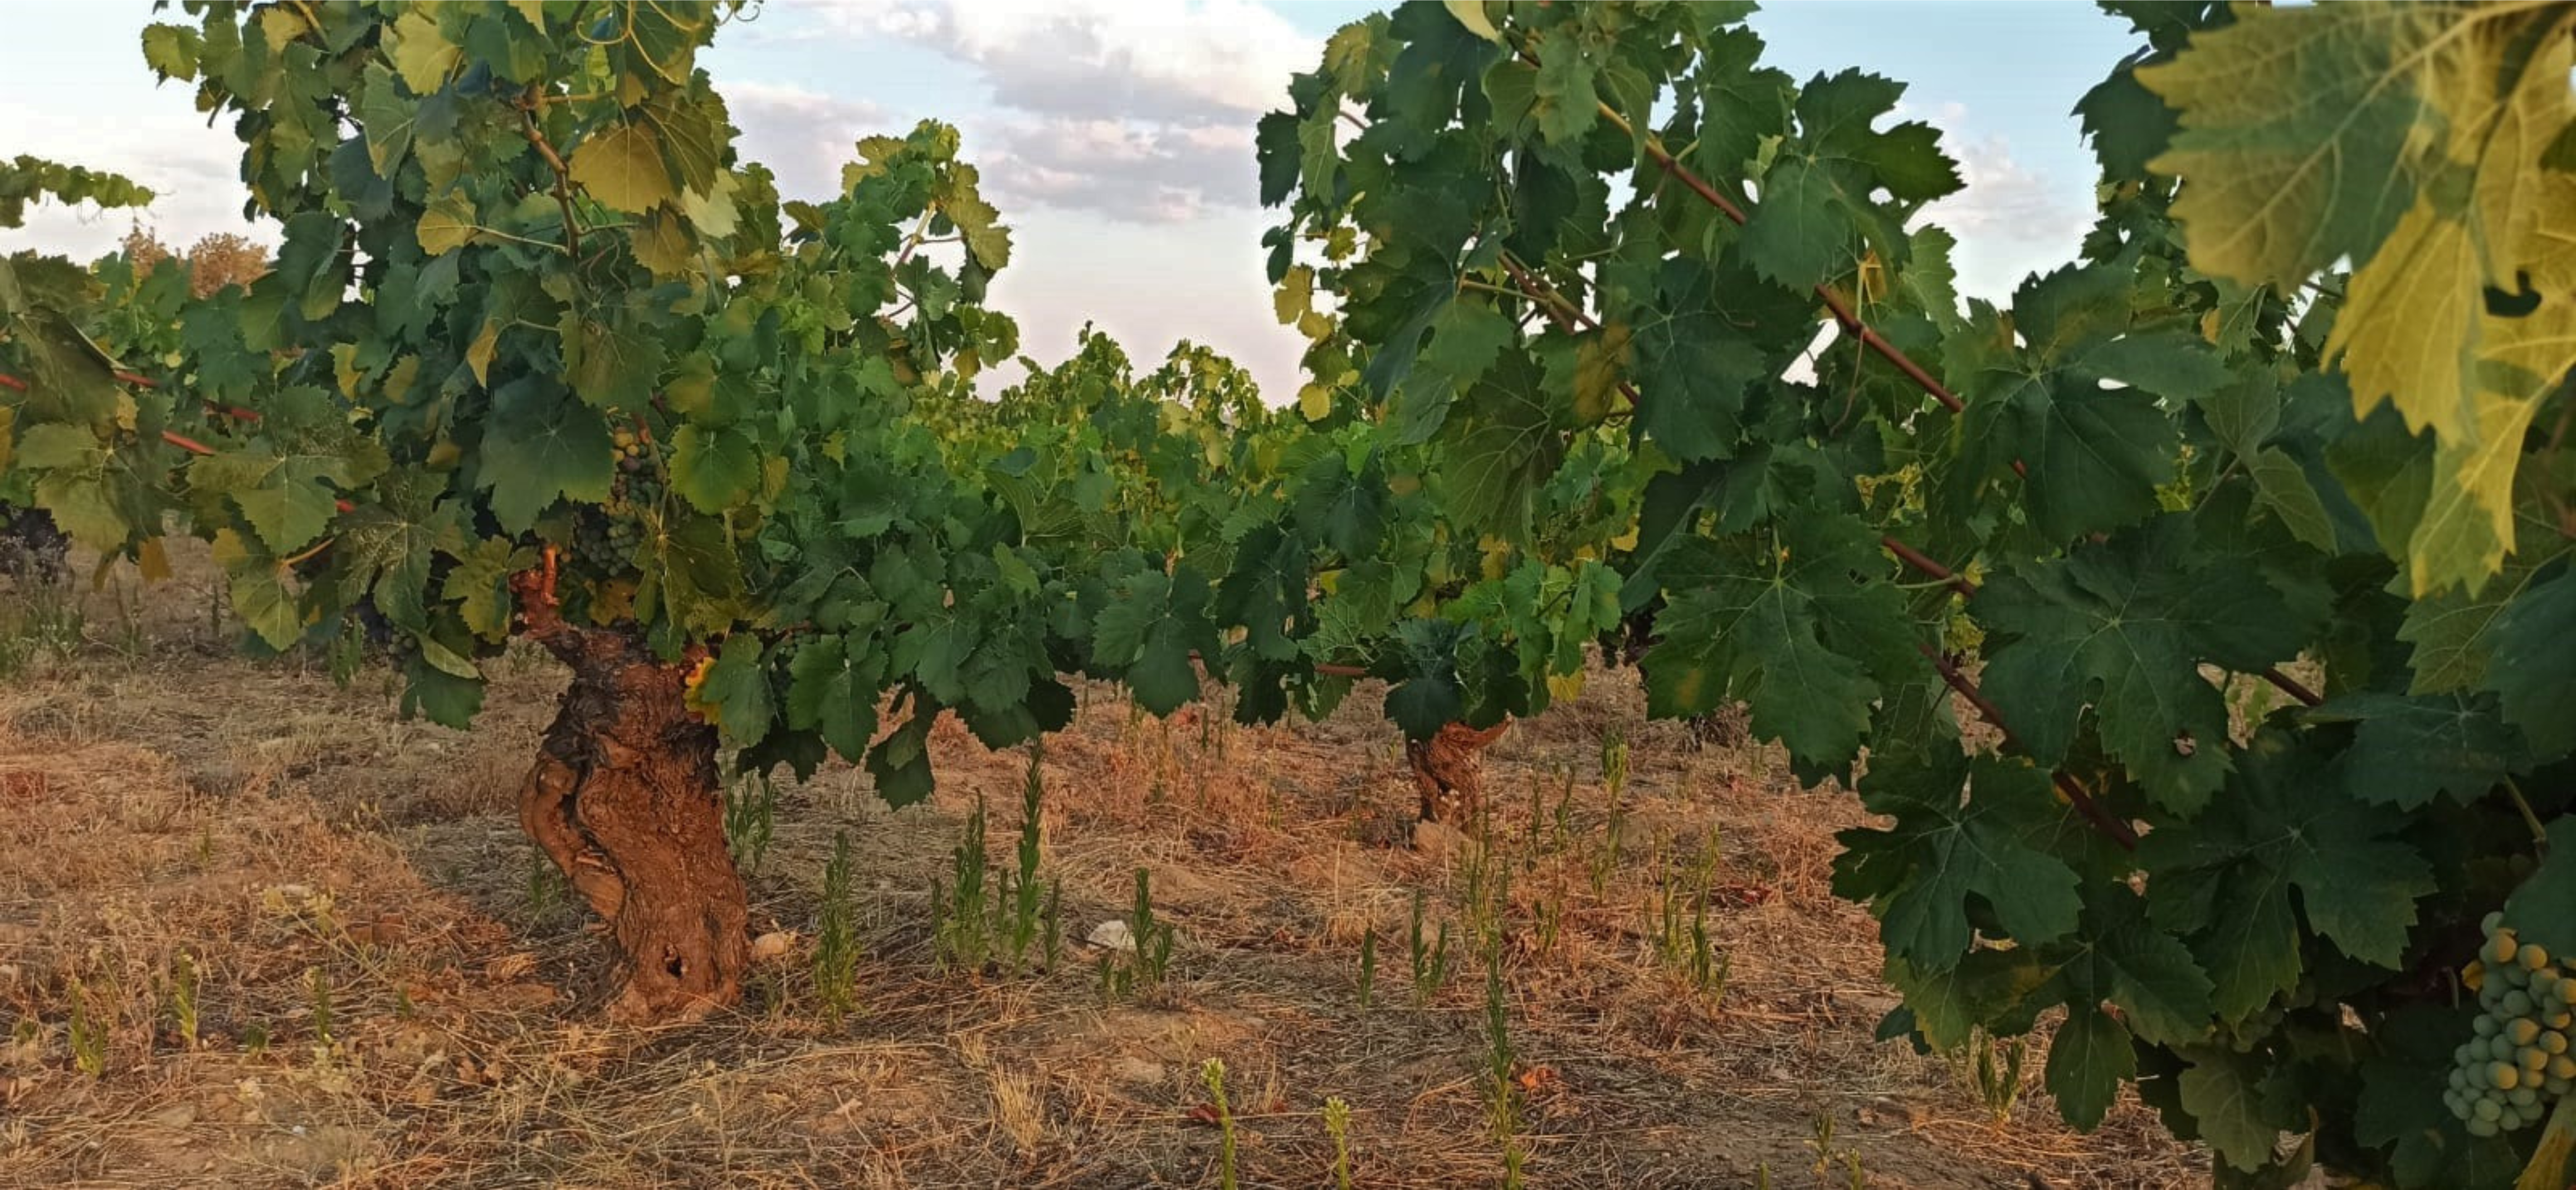 A vineyard in Arribes